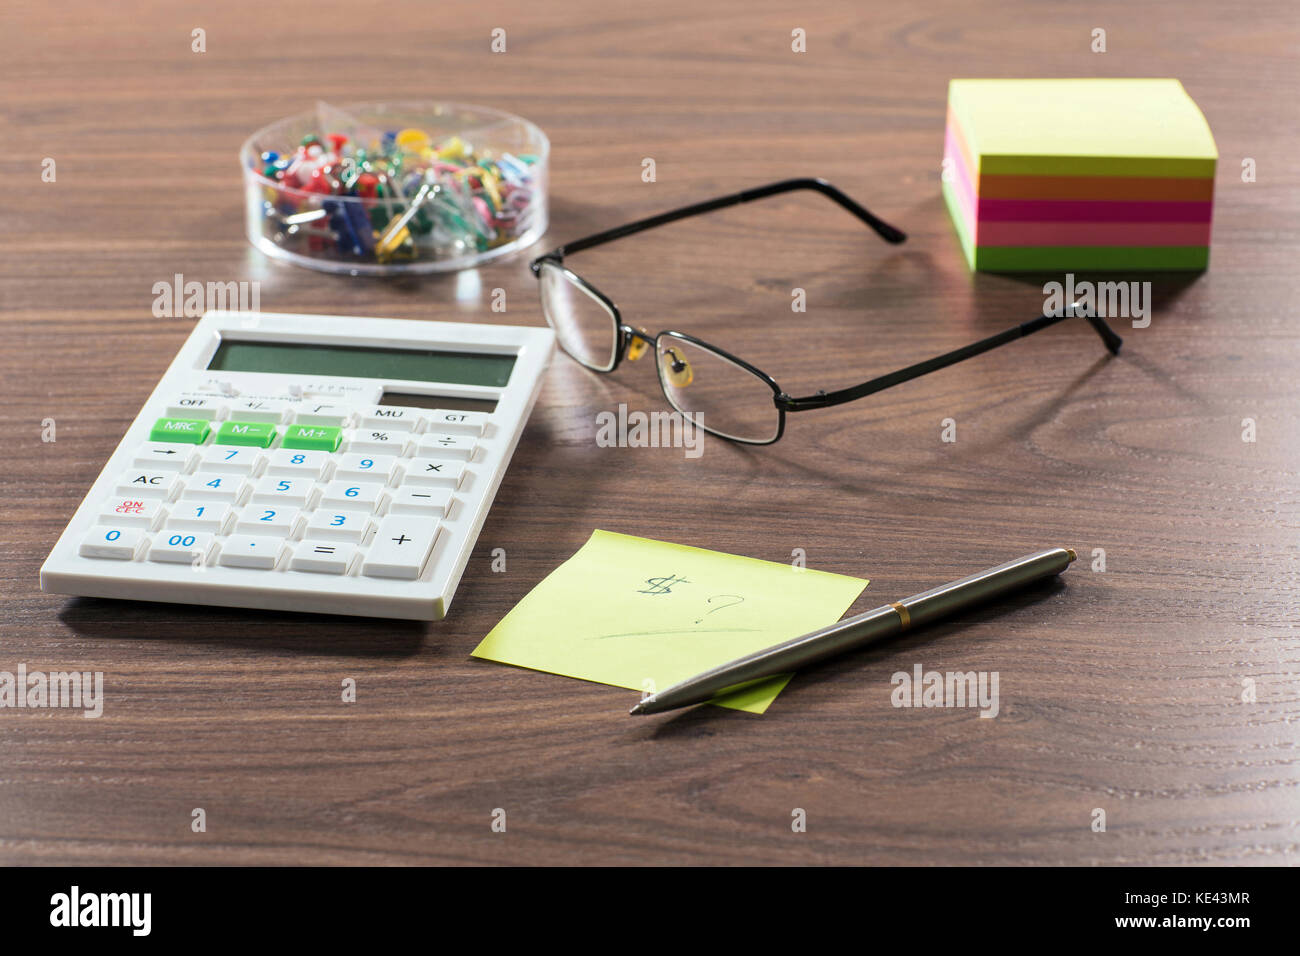 Different stationery objects on wooden table. Stock Photo